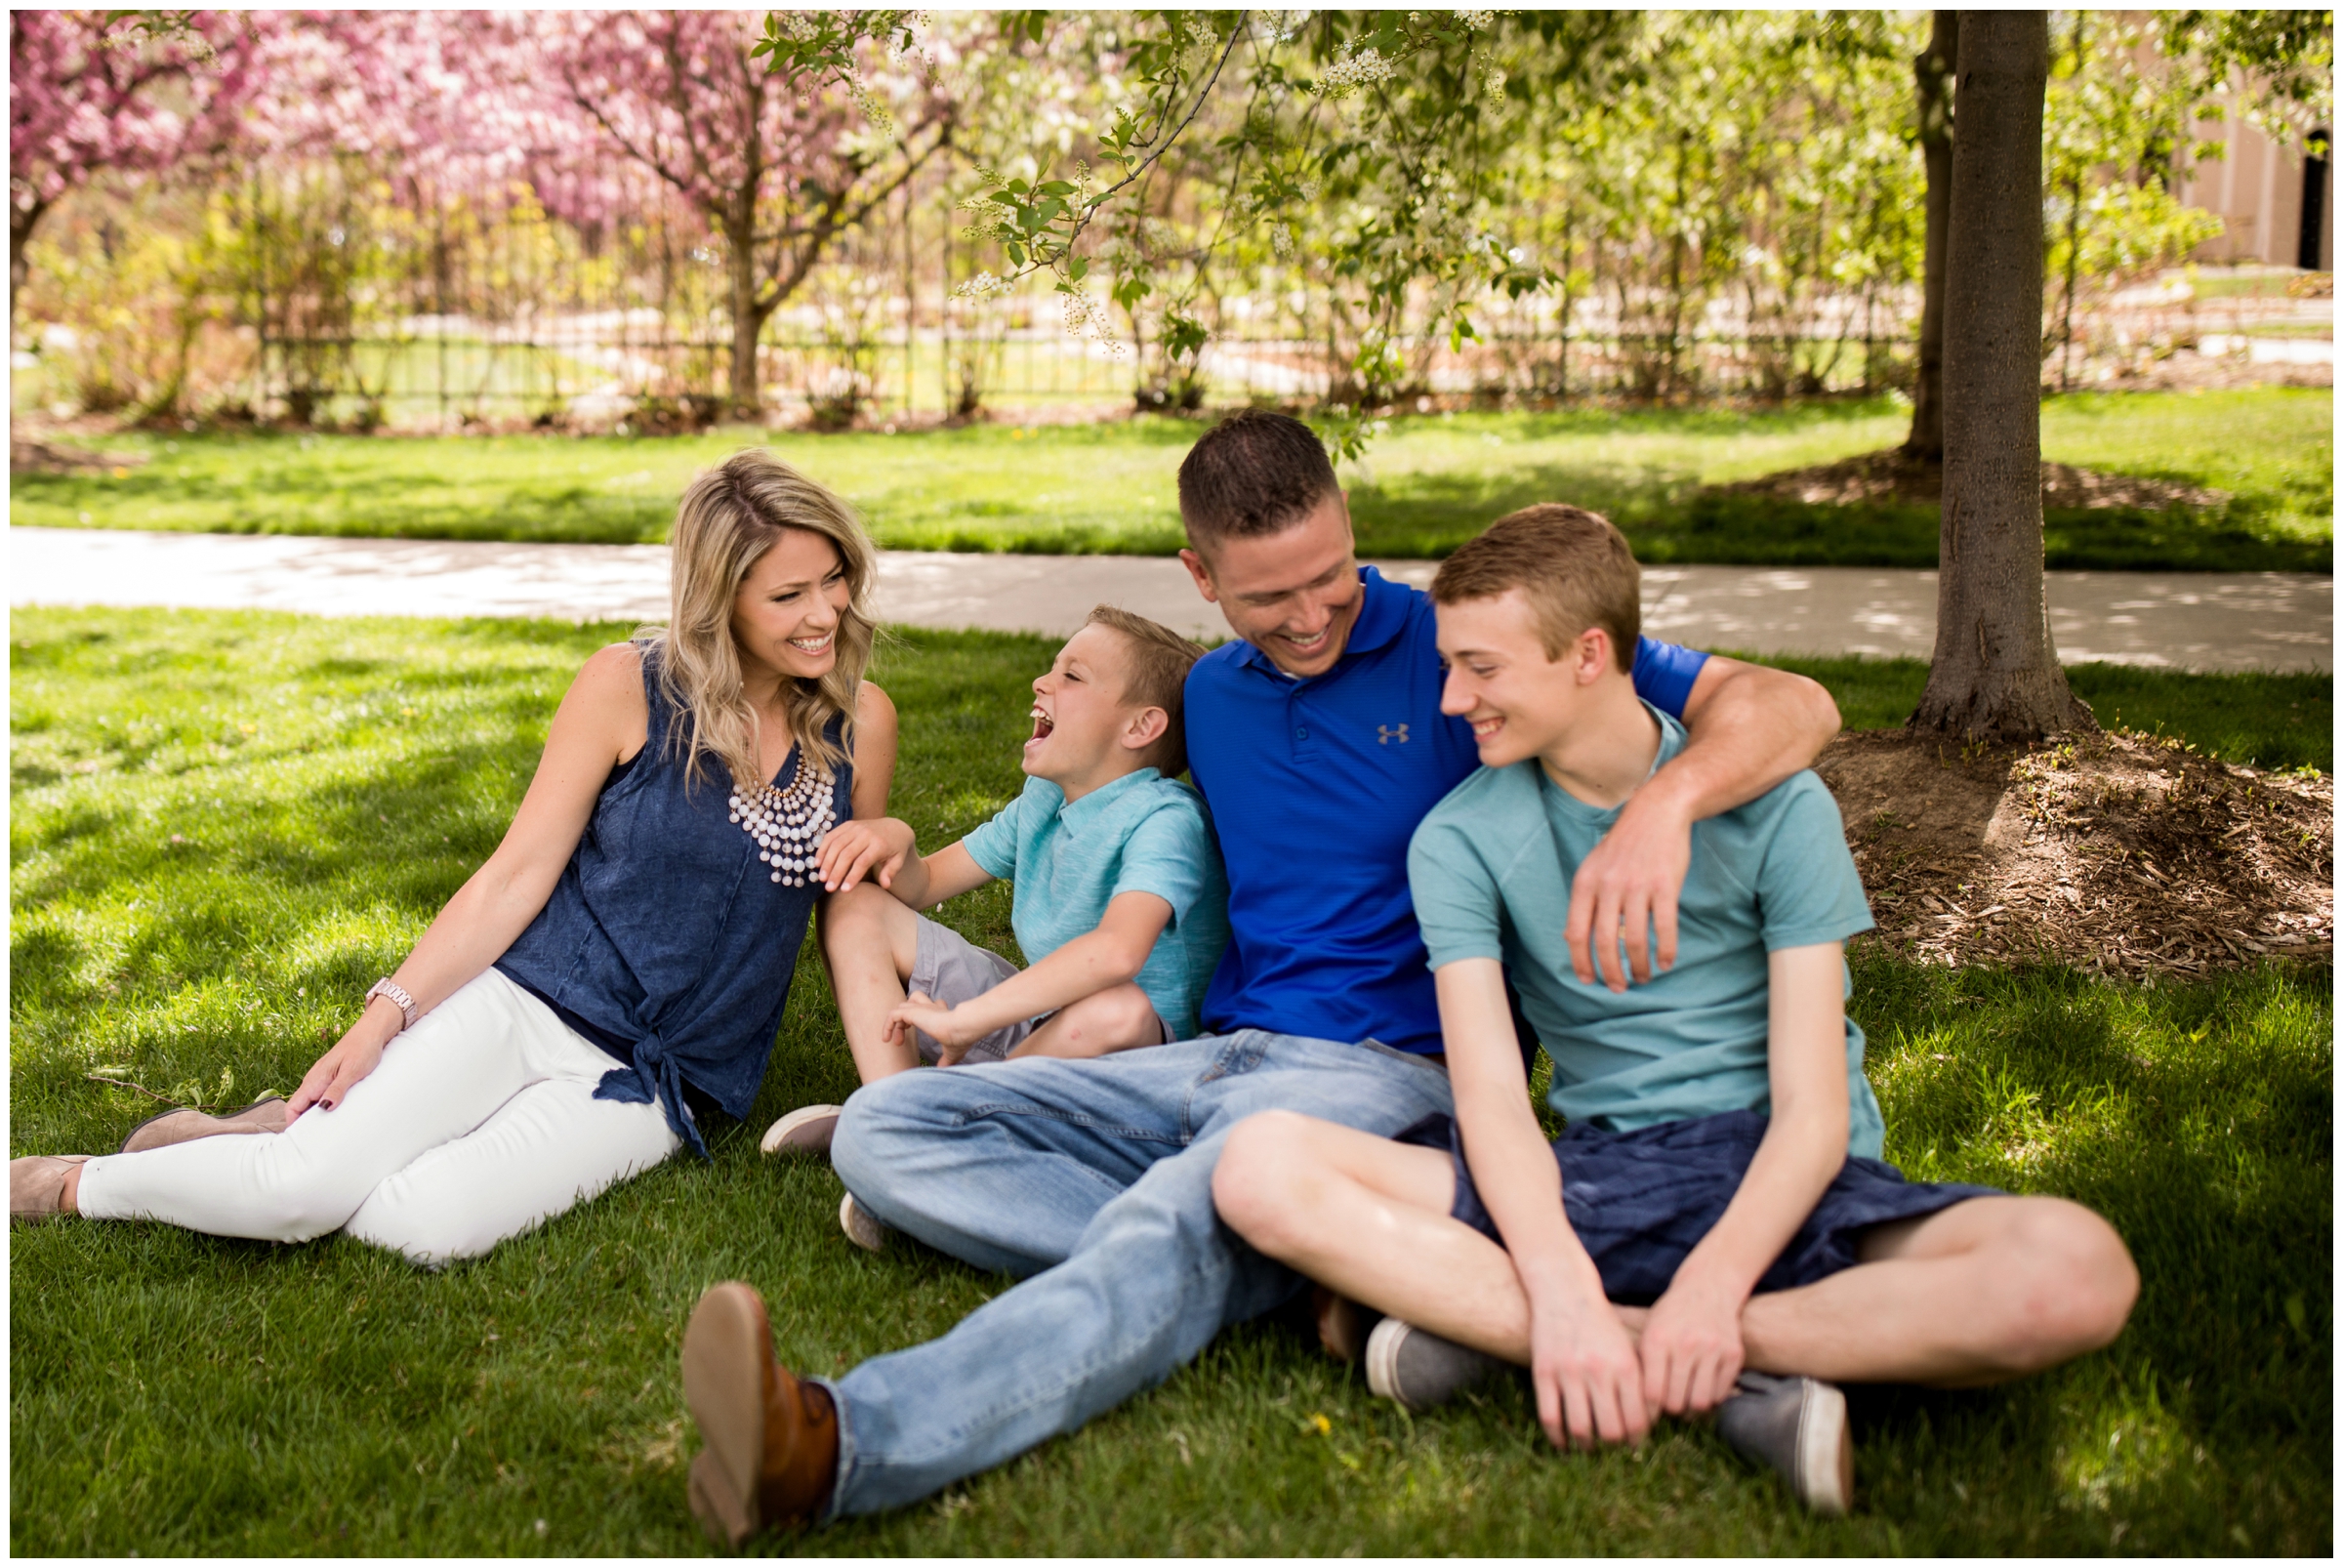 Longmont CO family portraits at Roosevelt Park with cherry blossoms by Colorado photographer Plum Pretty Photography